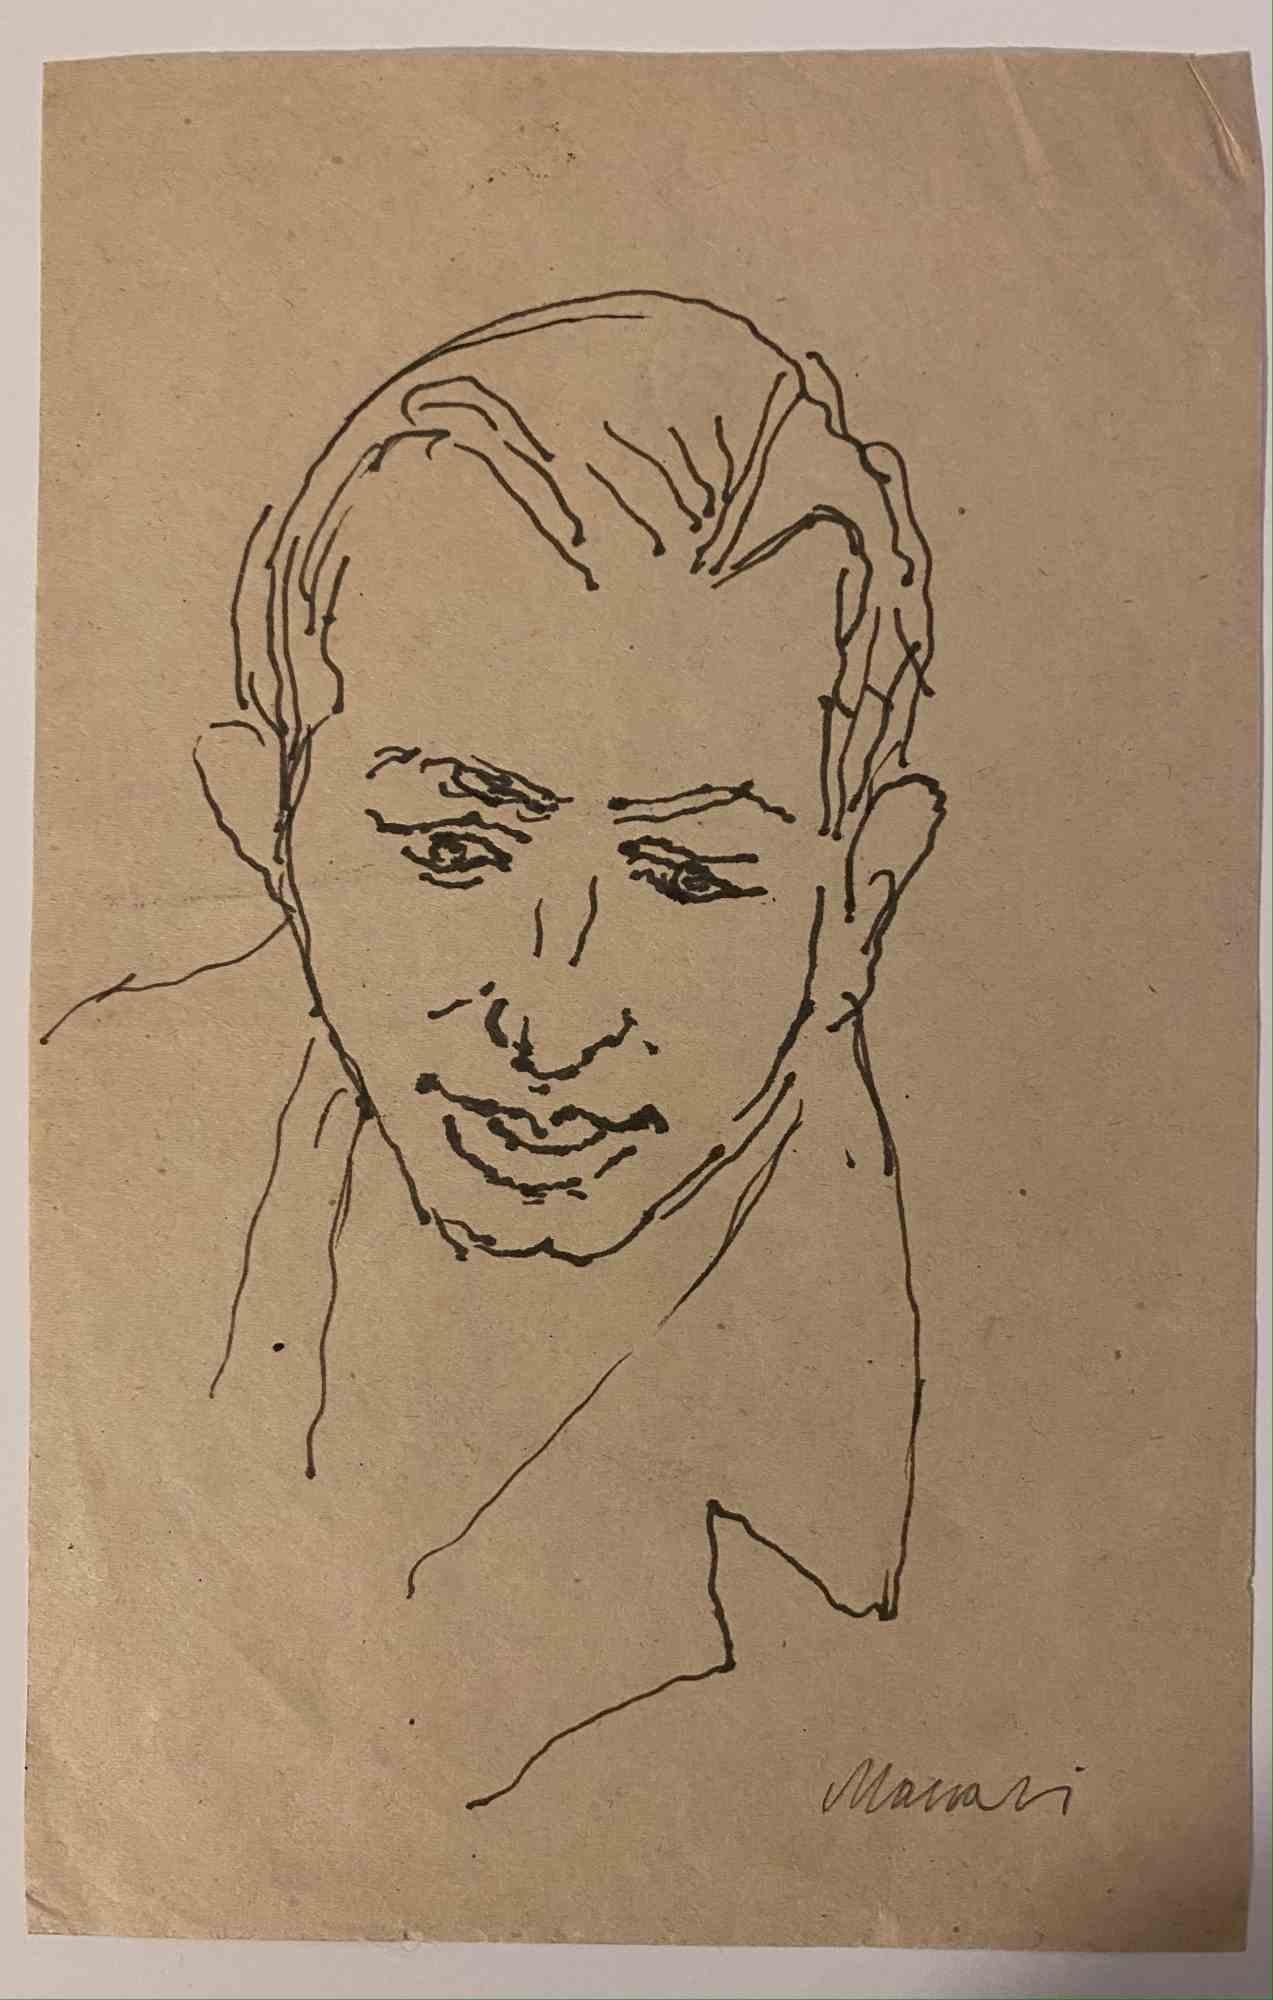 Portrait is an Original Drawing in pen on creamy-colored paper realized by Mino Maccari in the mid-20th century. 

Hand-signed by the artist on the lower. 

Good conditions.

Mino Maccari (1898-1989) was an Italian writer, painter, engraver, and